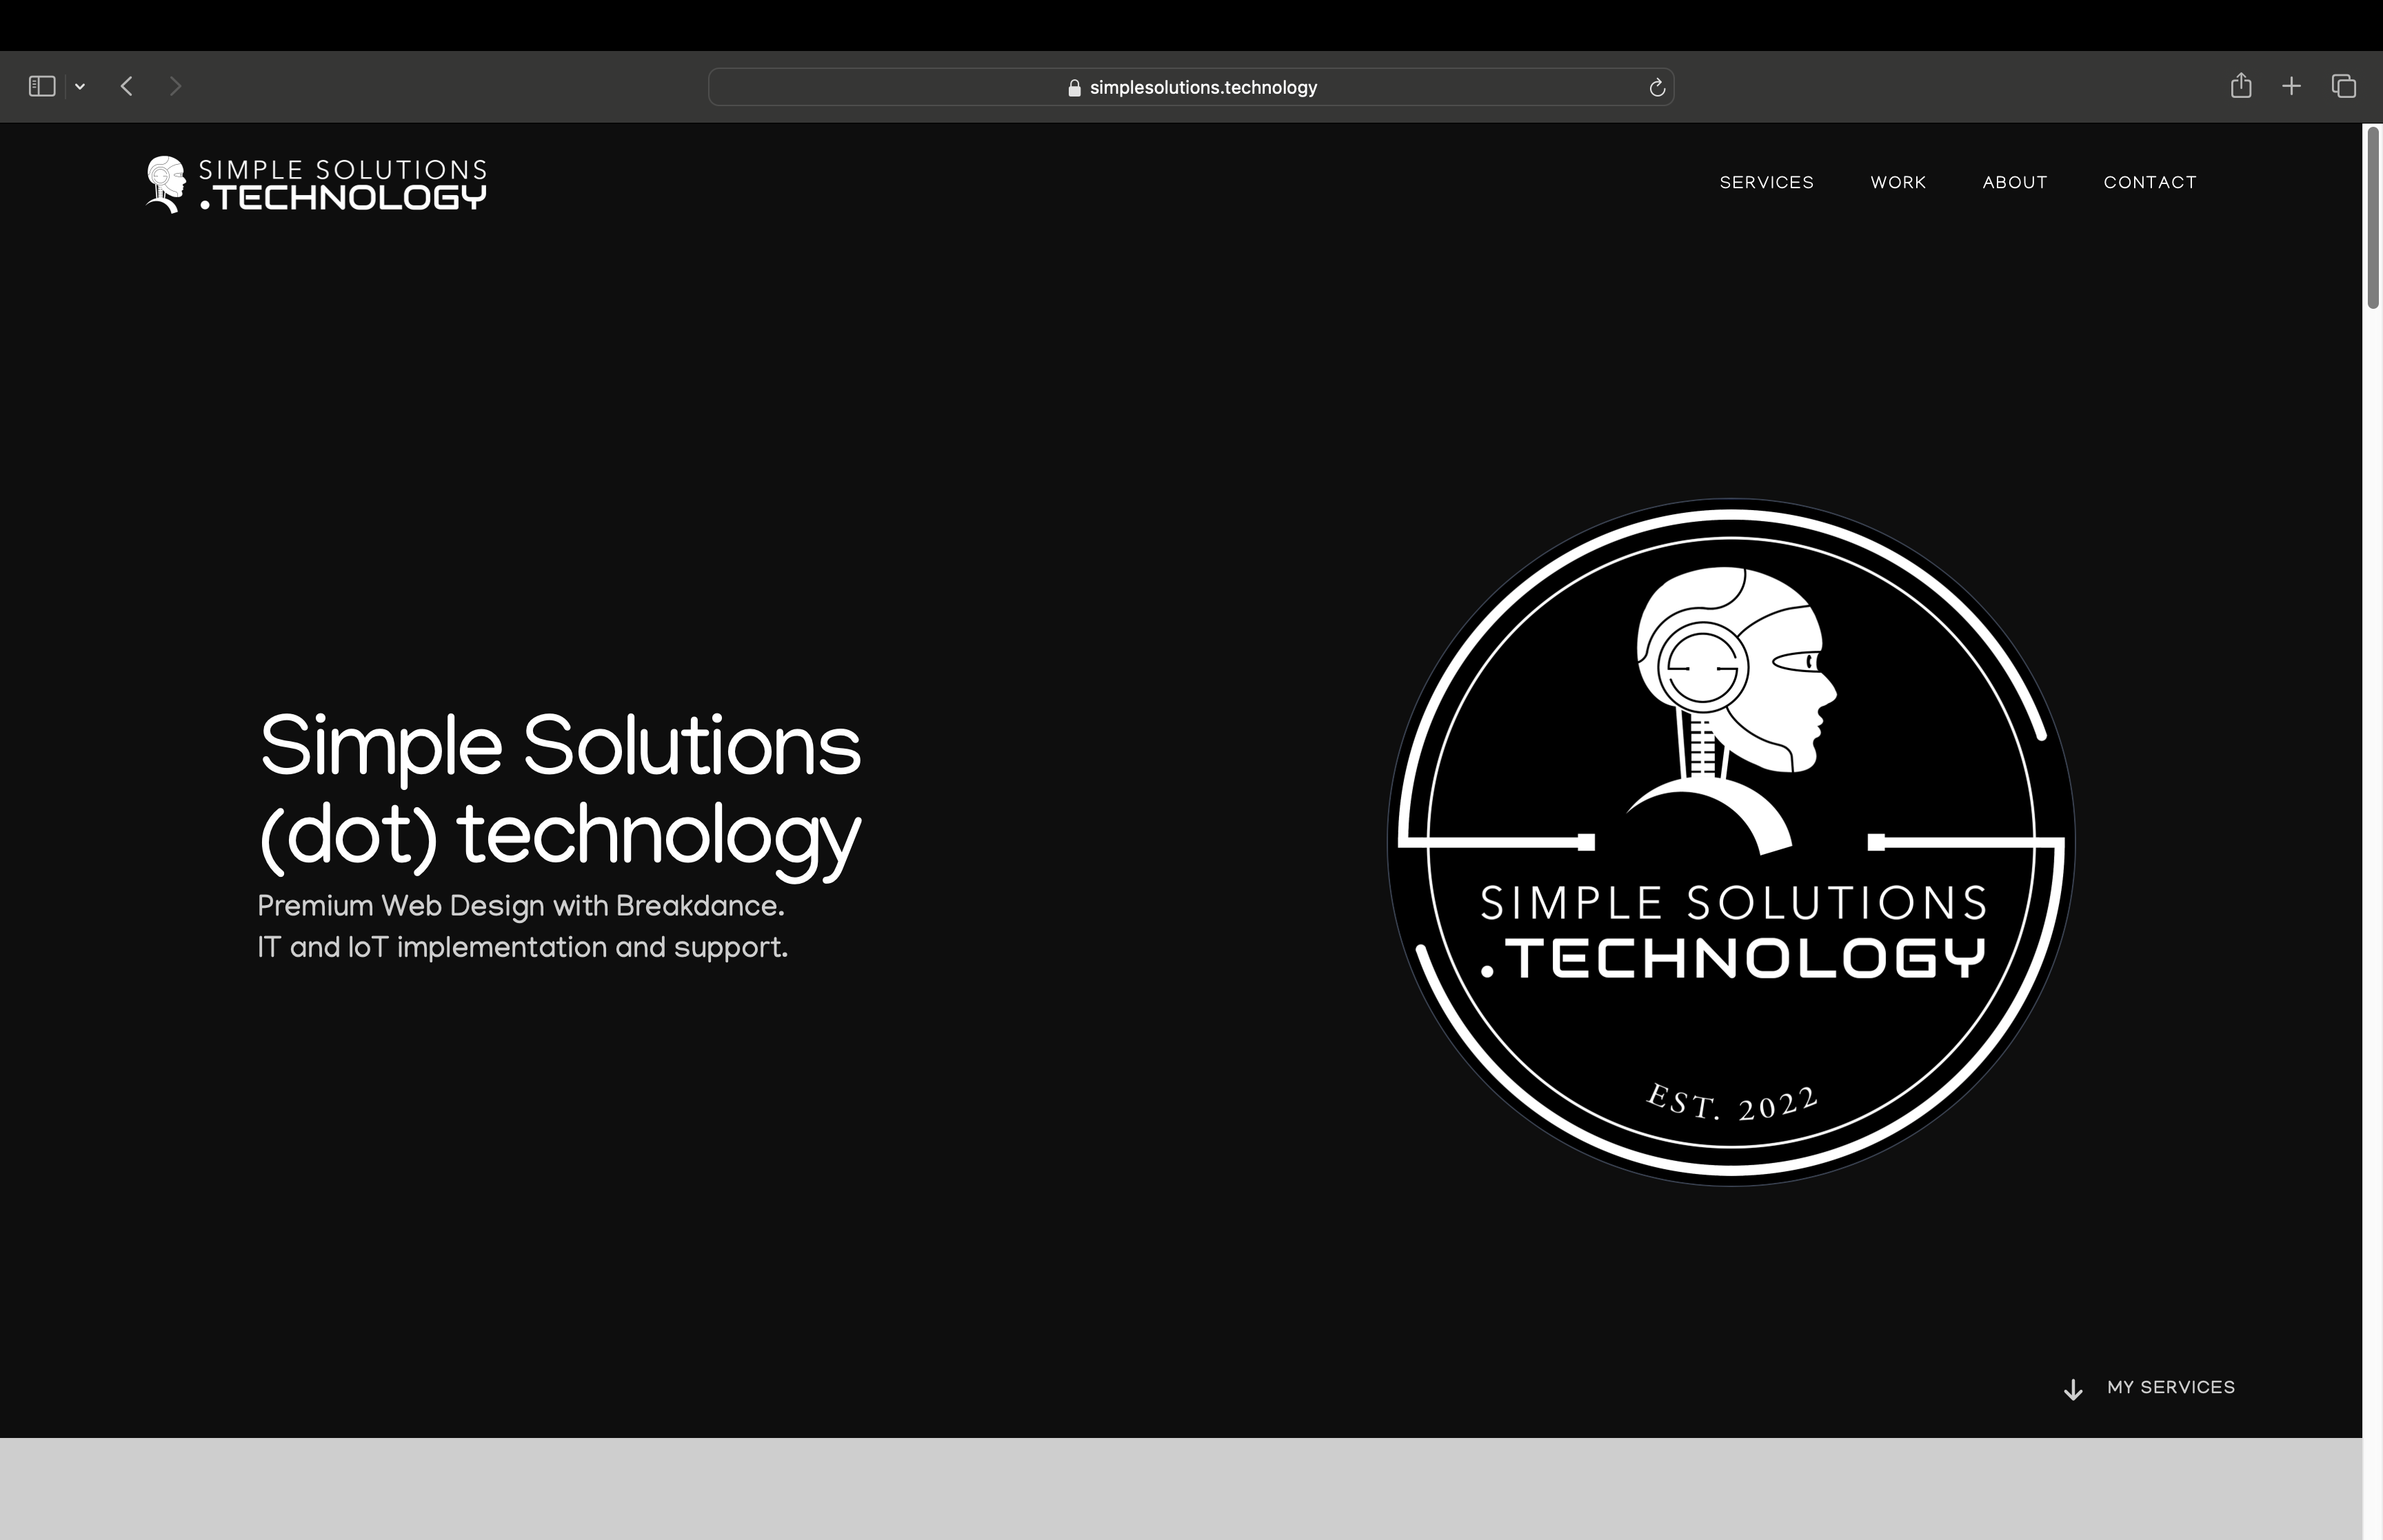 simplesolutions.technology